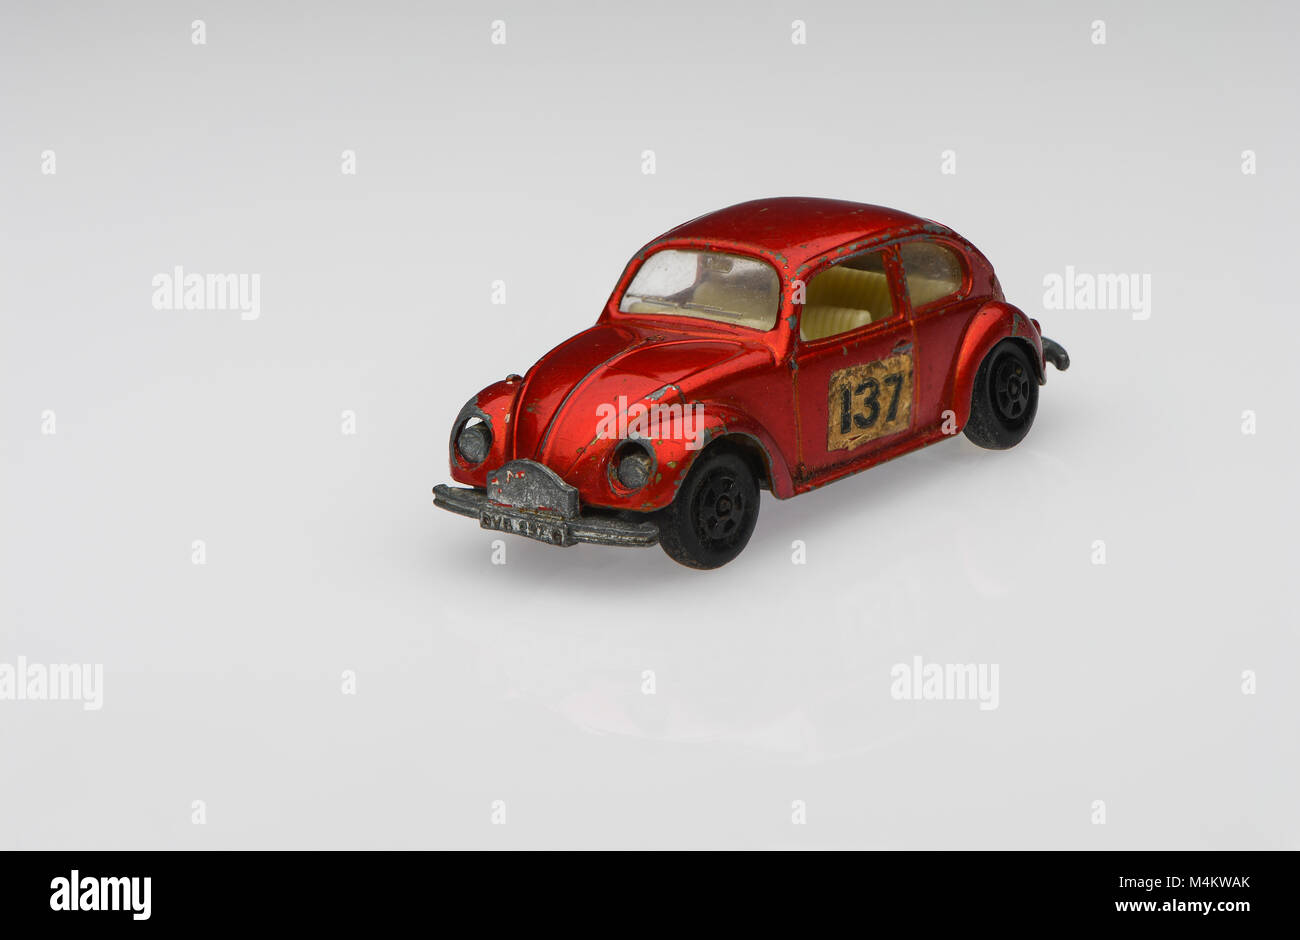 A red vintage 1500 saloon Volkswagen beetle toy race car car